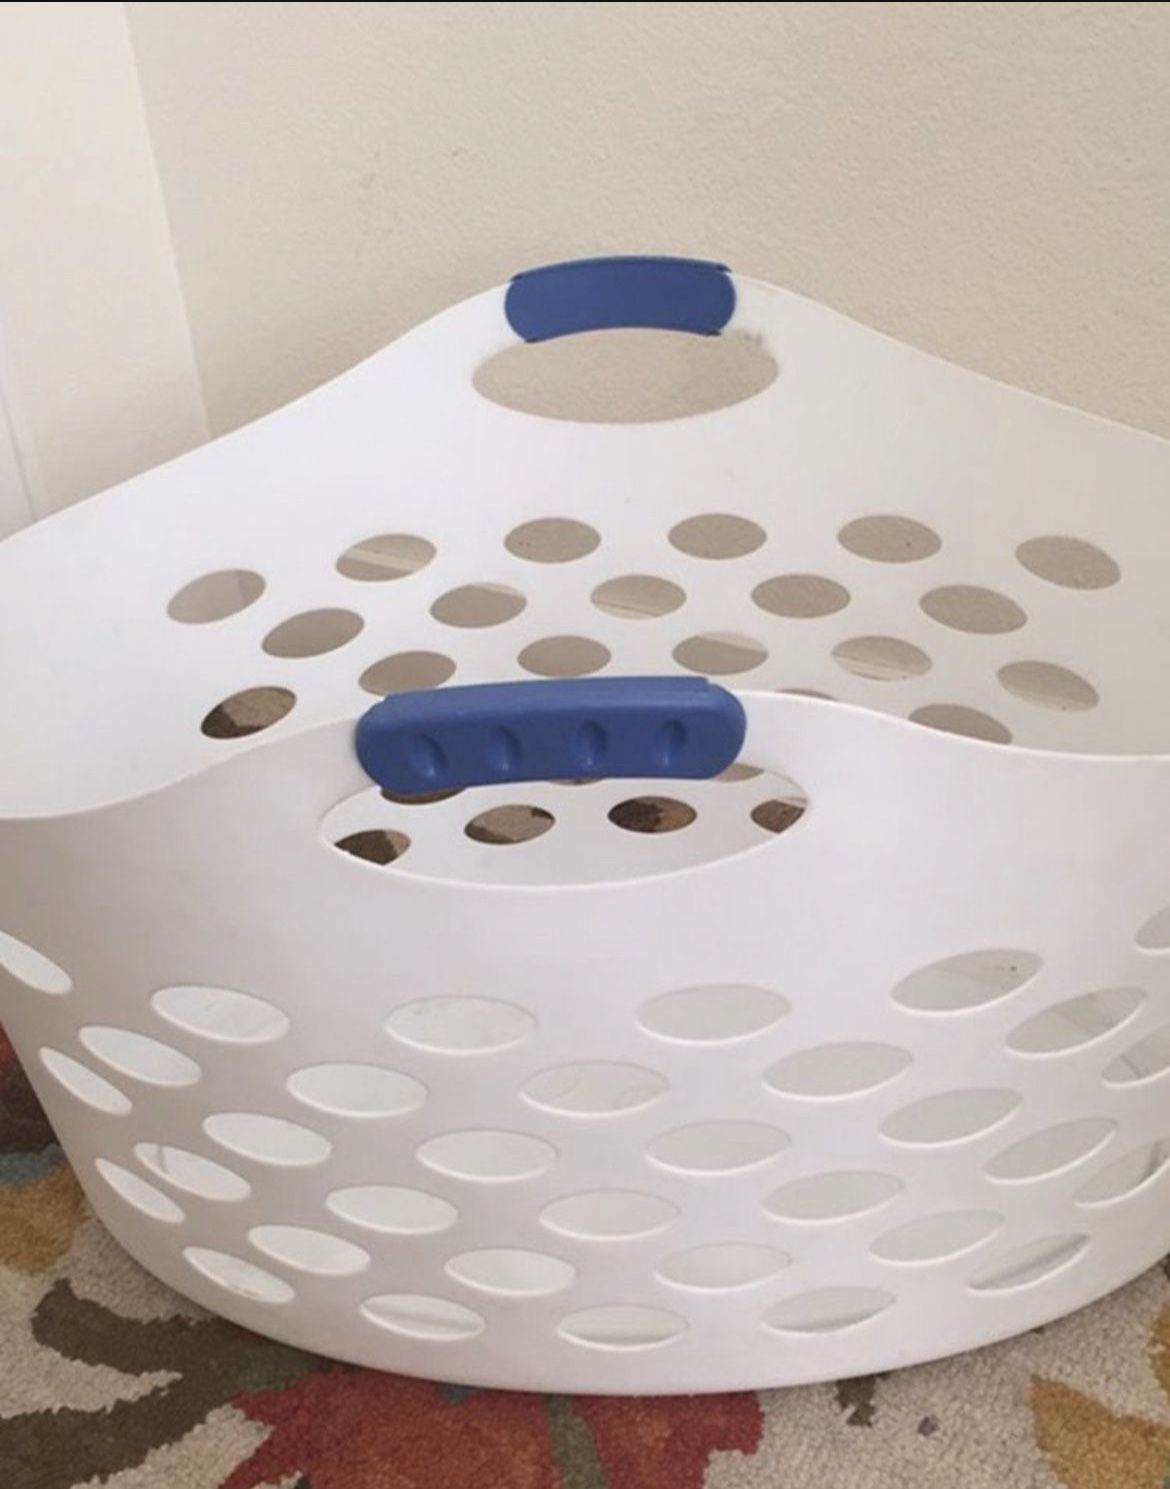 Rubbermaid flex and carry basket